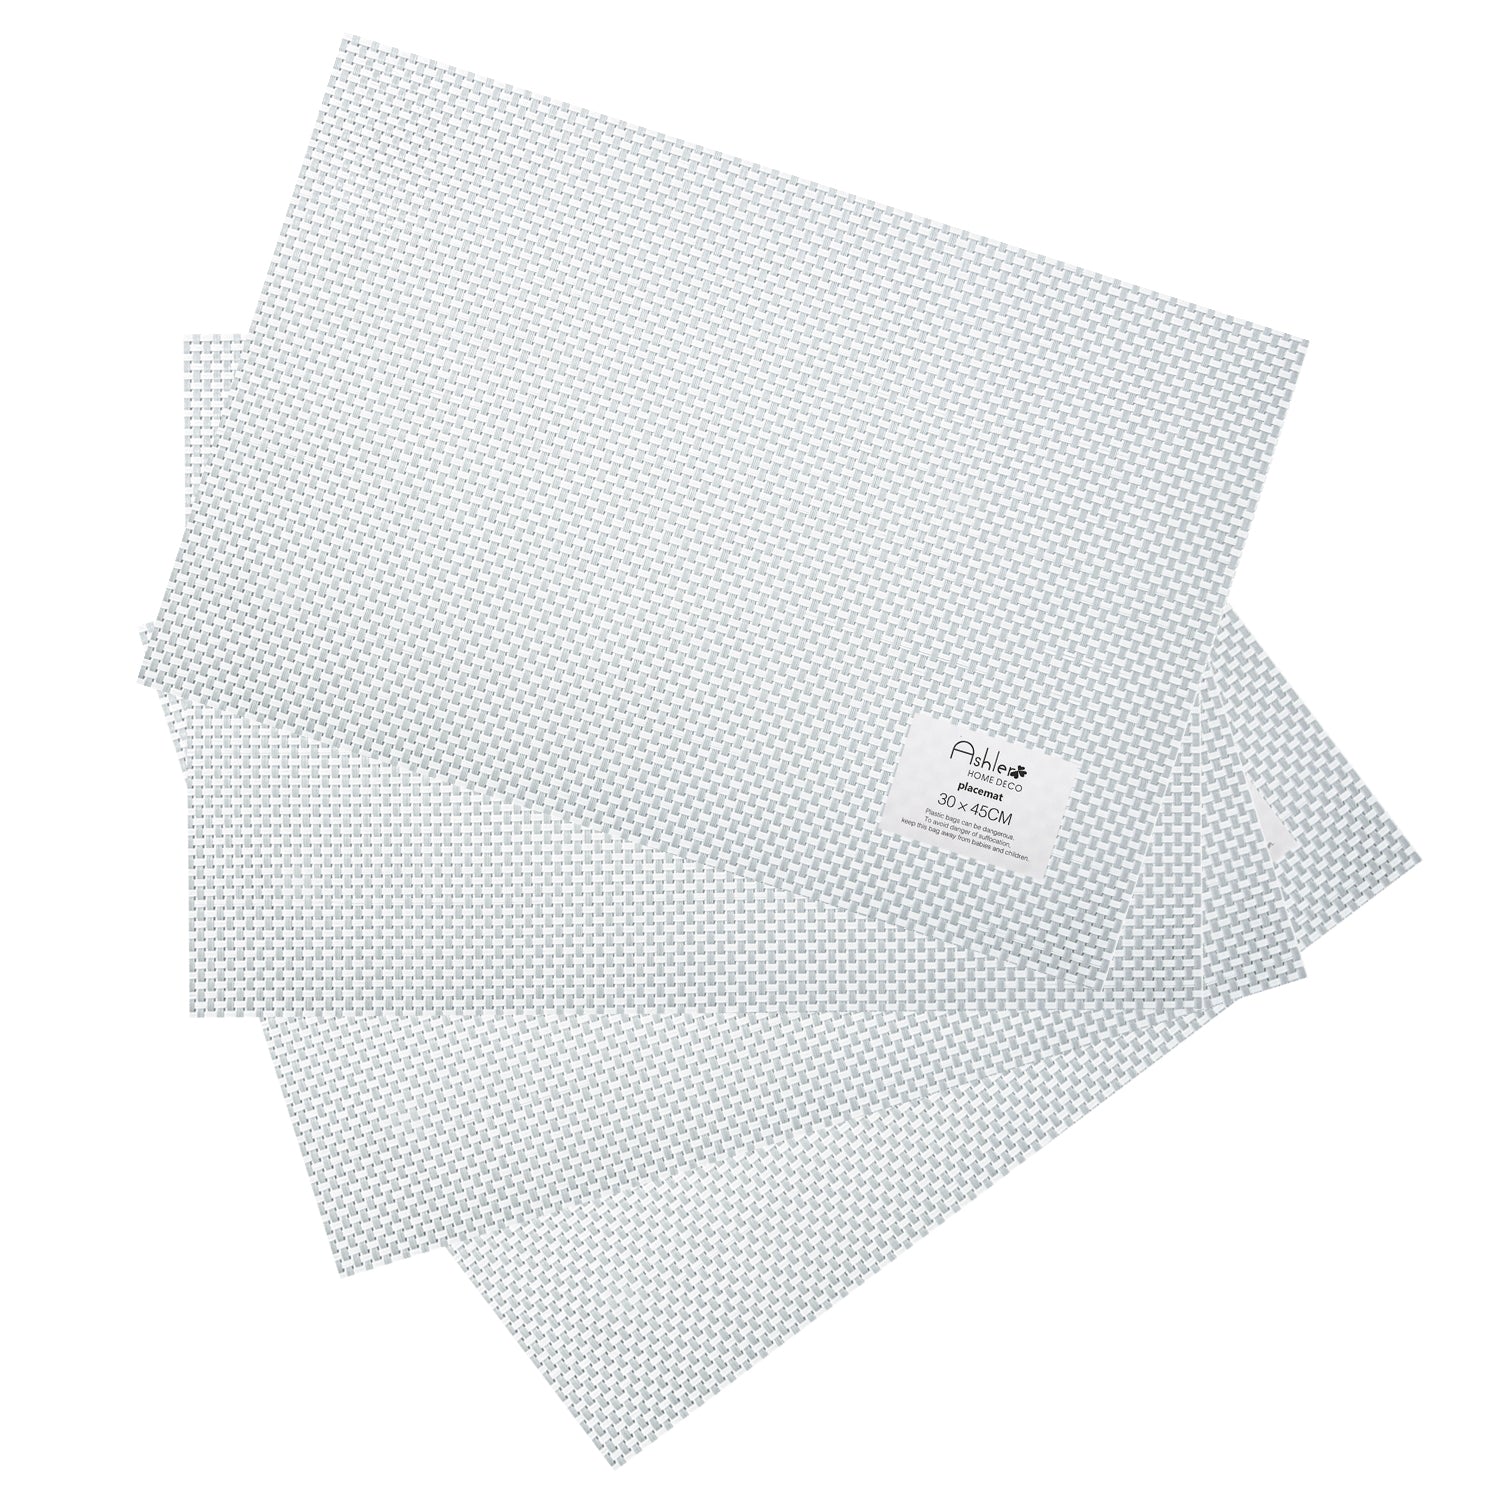 White Heat-resistant Woven Place Mats Set of 4